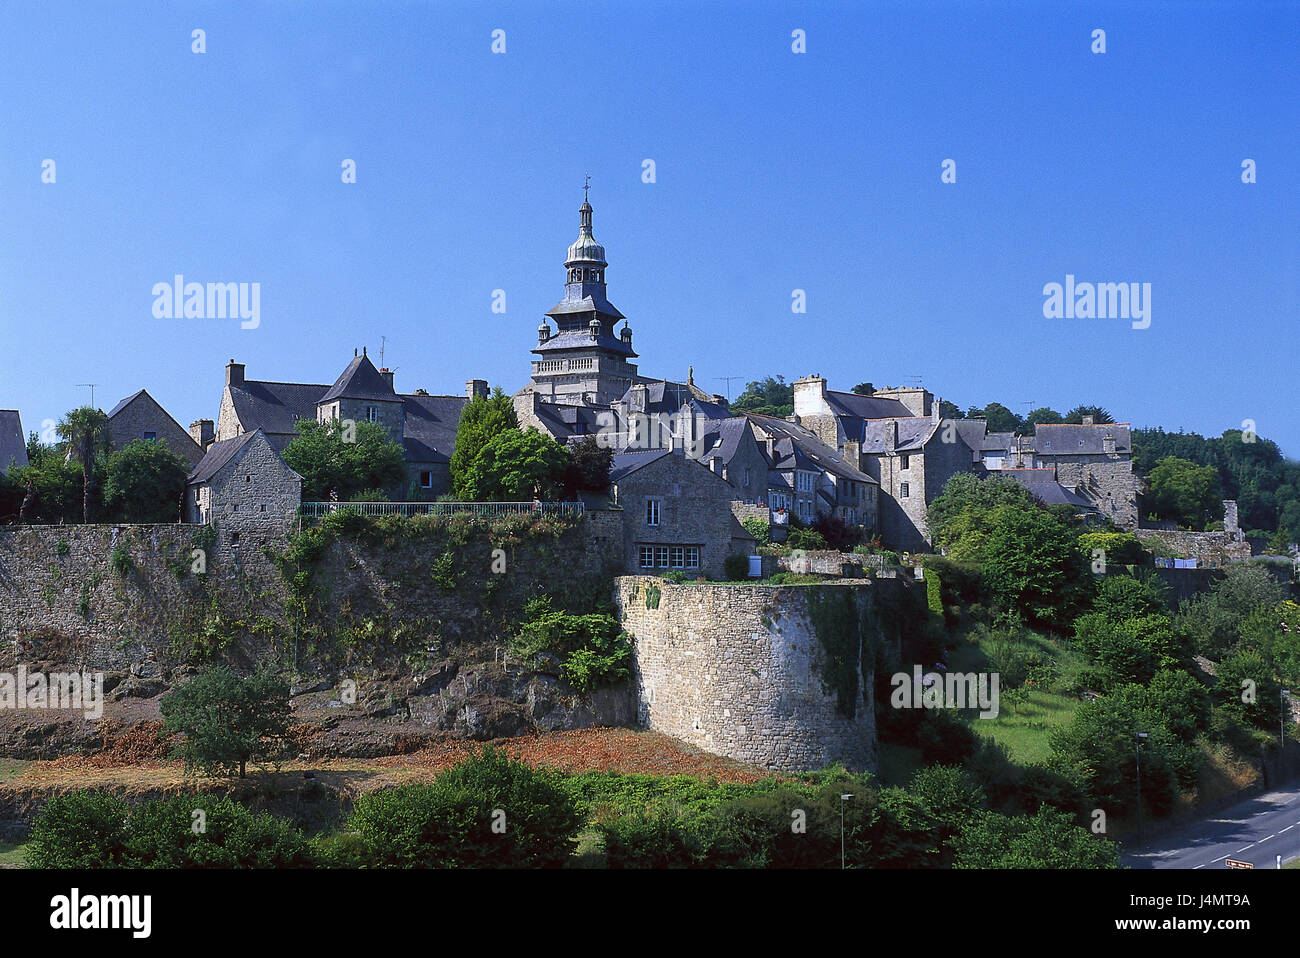 France, Brittany, Moncontour, town view, church Europe, the Cotes you-north, town, houses, residential houses, parish church, structure, architecture, culture, steeple, place of interest Stock Photo